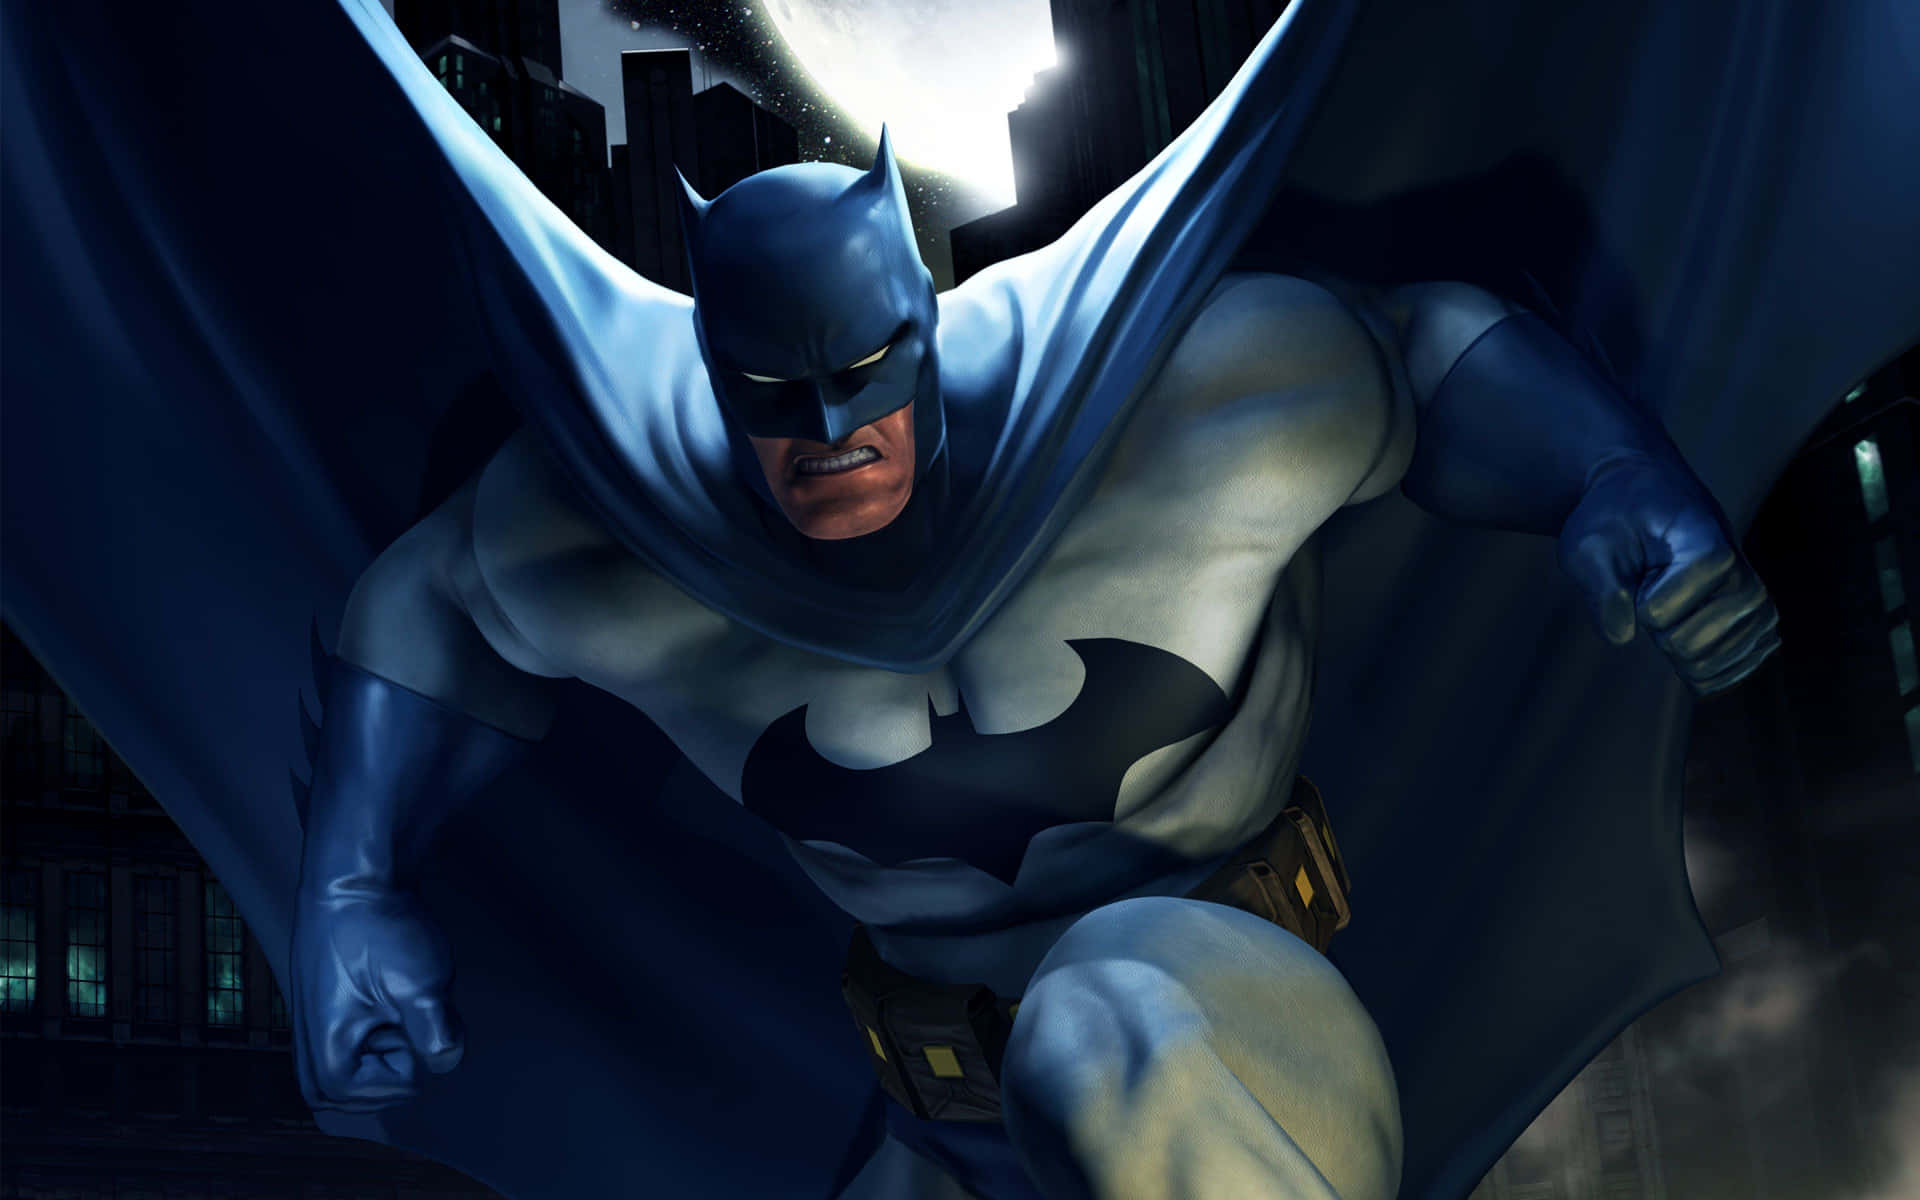 Batman takes on the challenge of fighting crime in the iconic animated series. Wallpaper